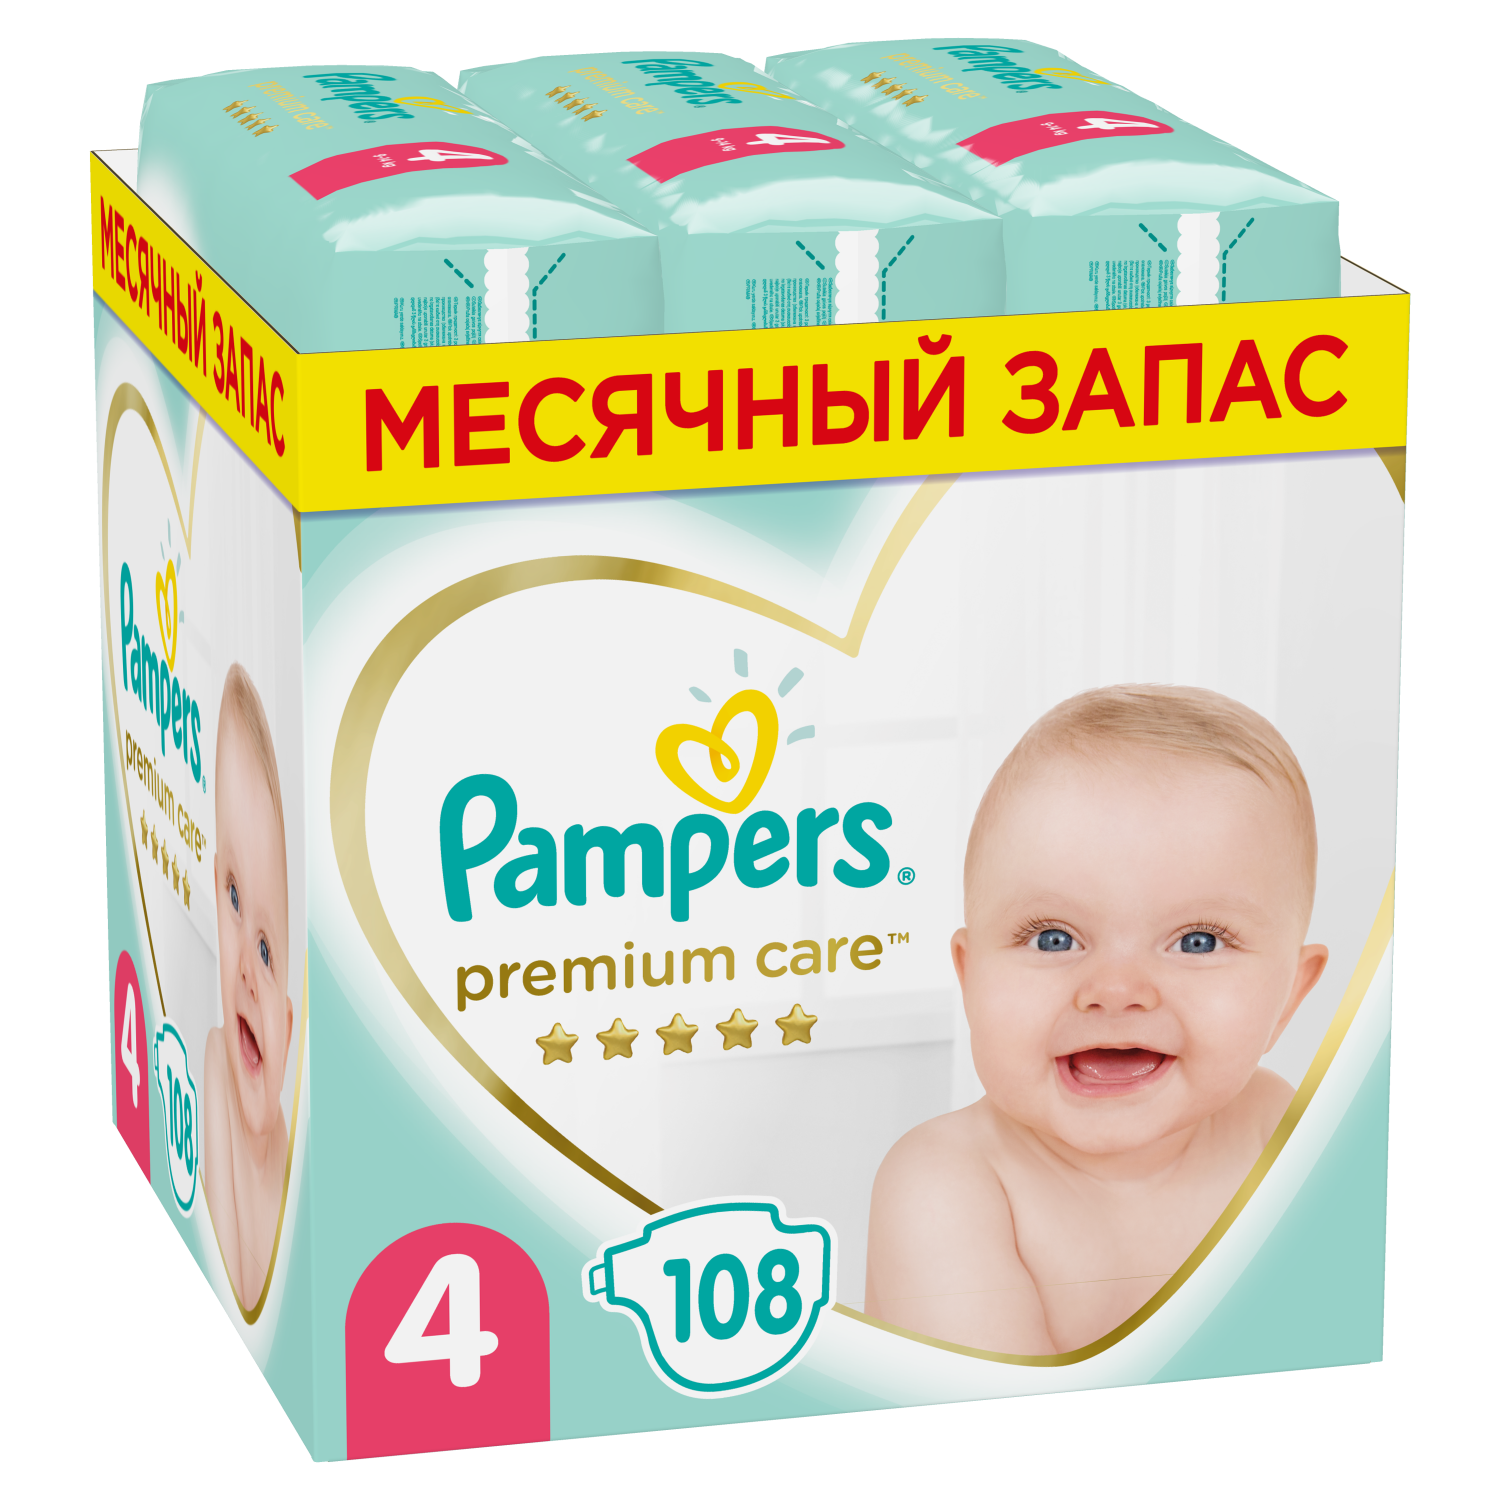 mall pampers 4